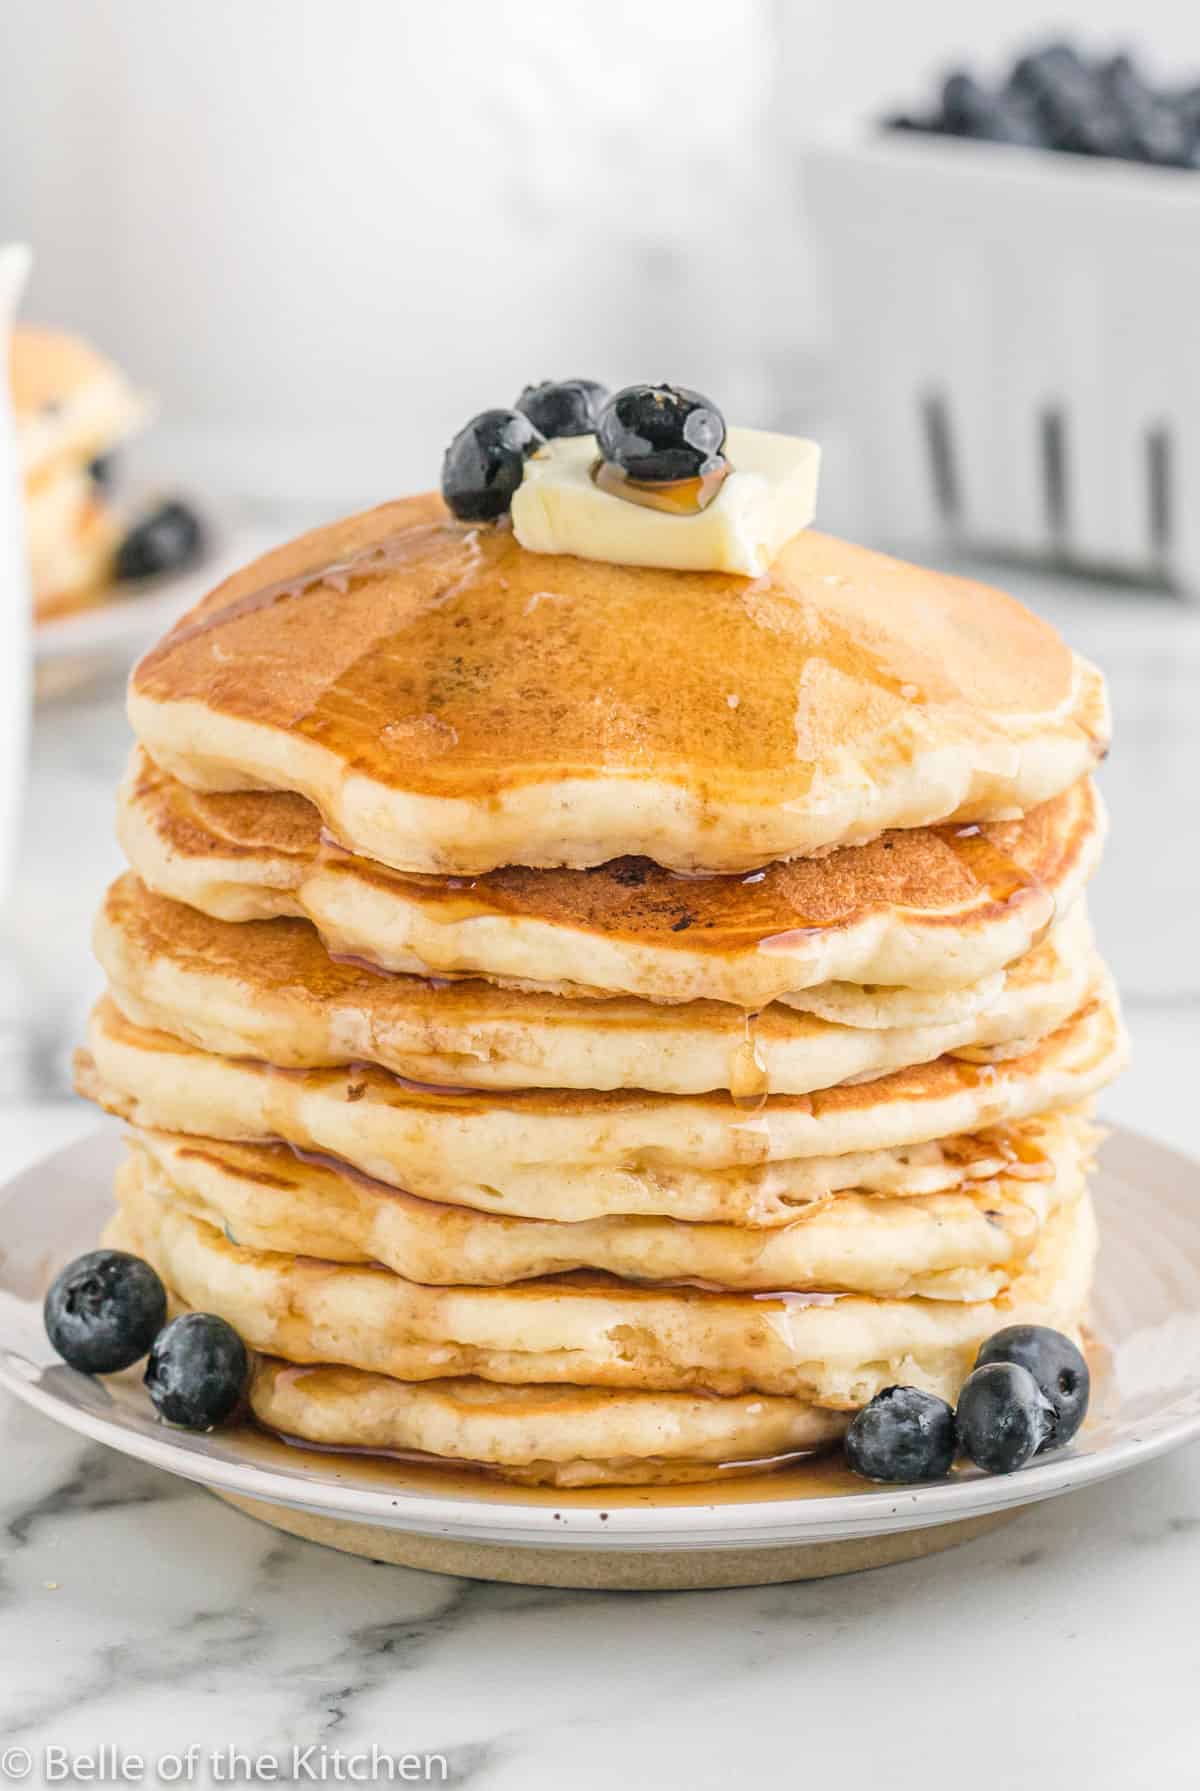 a stack of pancakes topped with butter, syrup, and blueberries.